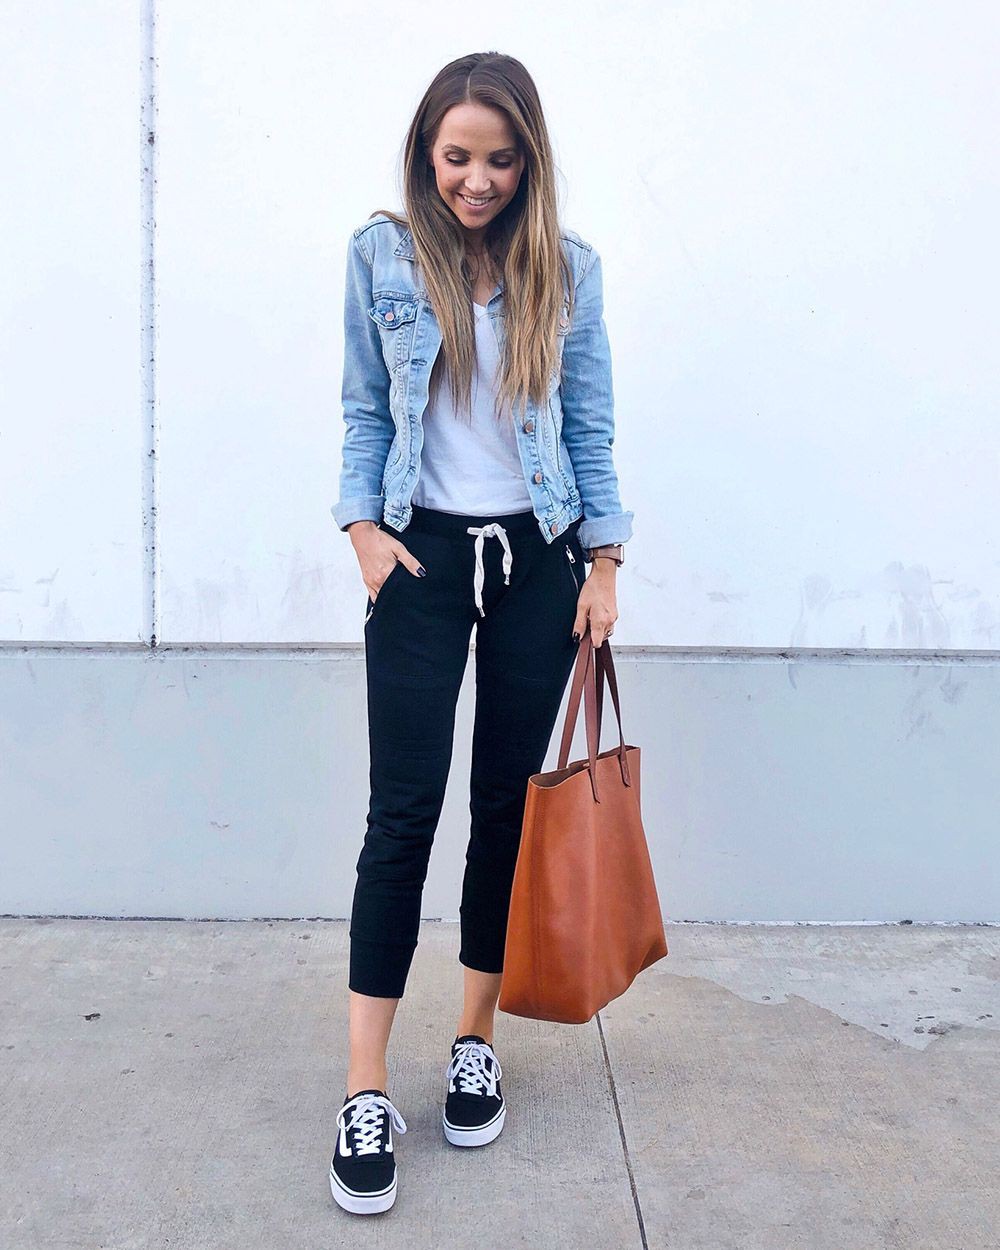 Jogger Outfit Ideas For Girls, Jean jacket, Denim skirt: Jean jacket,  Jogger Outfits  